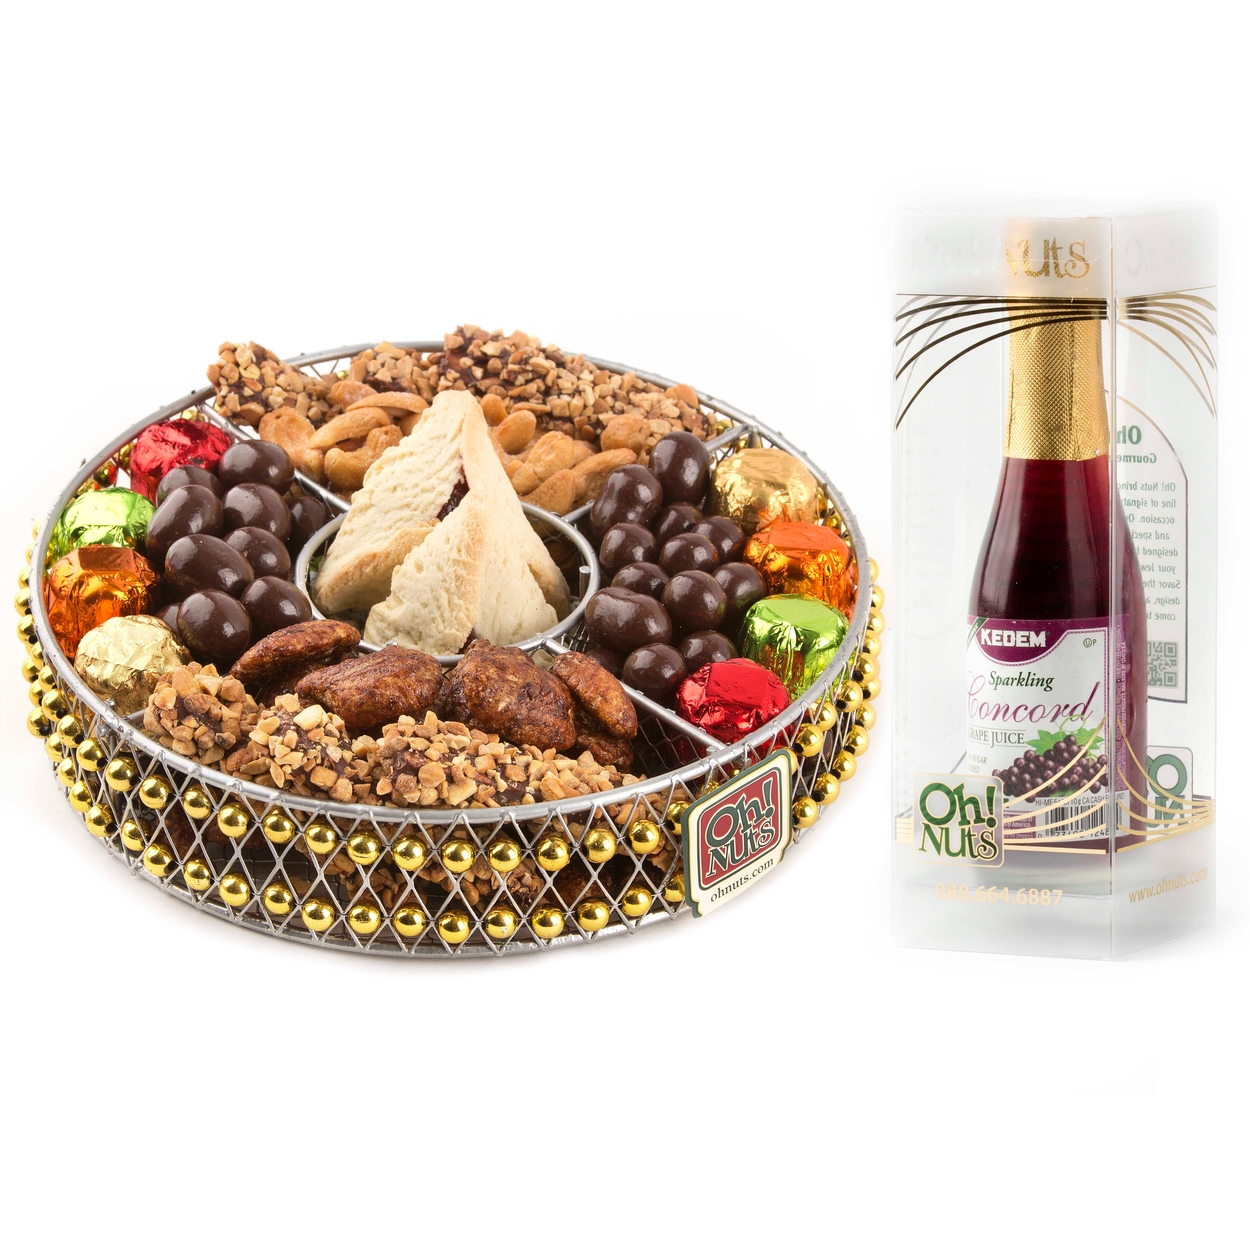 Purim Round Gift Tray Shalach Manot Trays Bo Baskets Mishloach Gifts Themes Oh Nuts